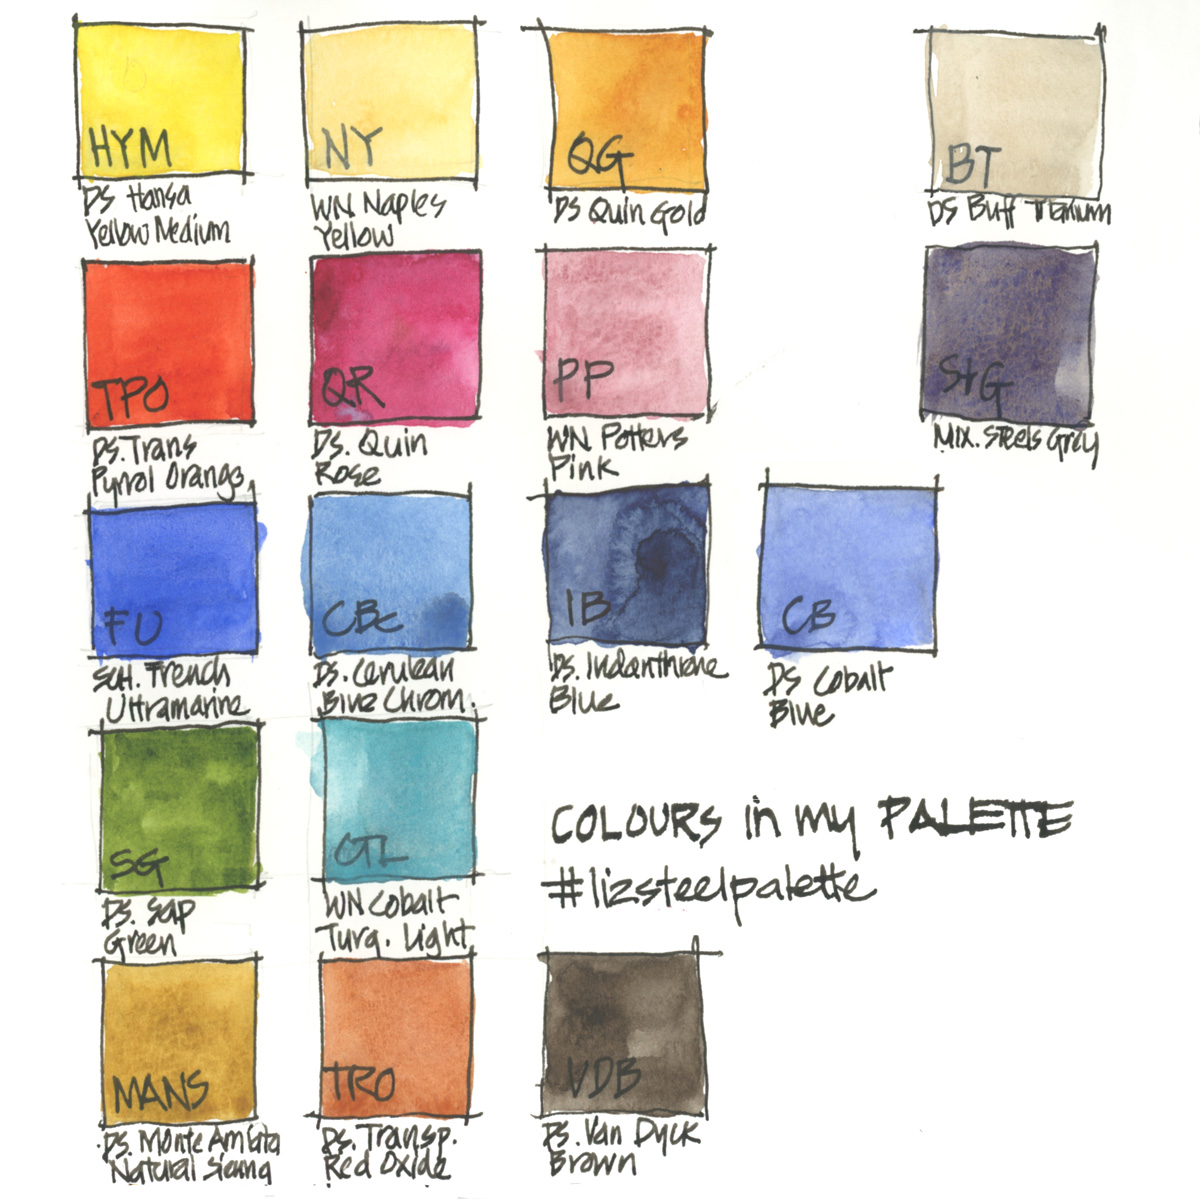 Which color is your favorite from the @Scribblelady watercolor palette